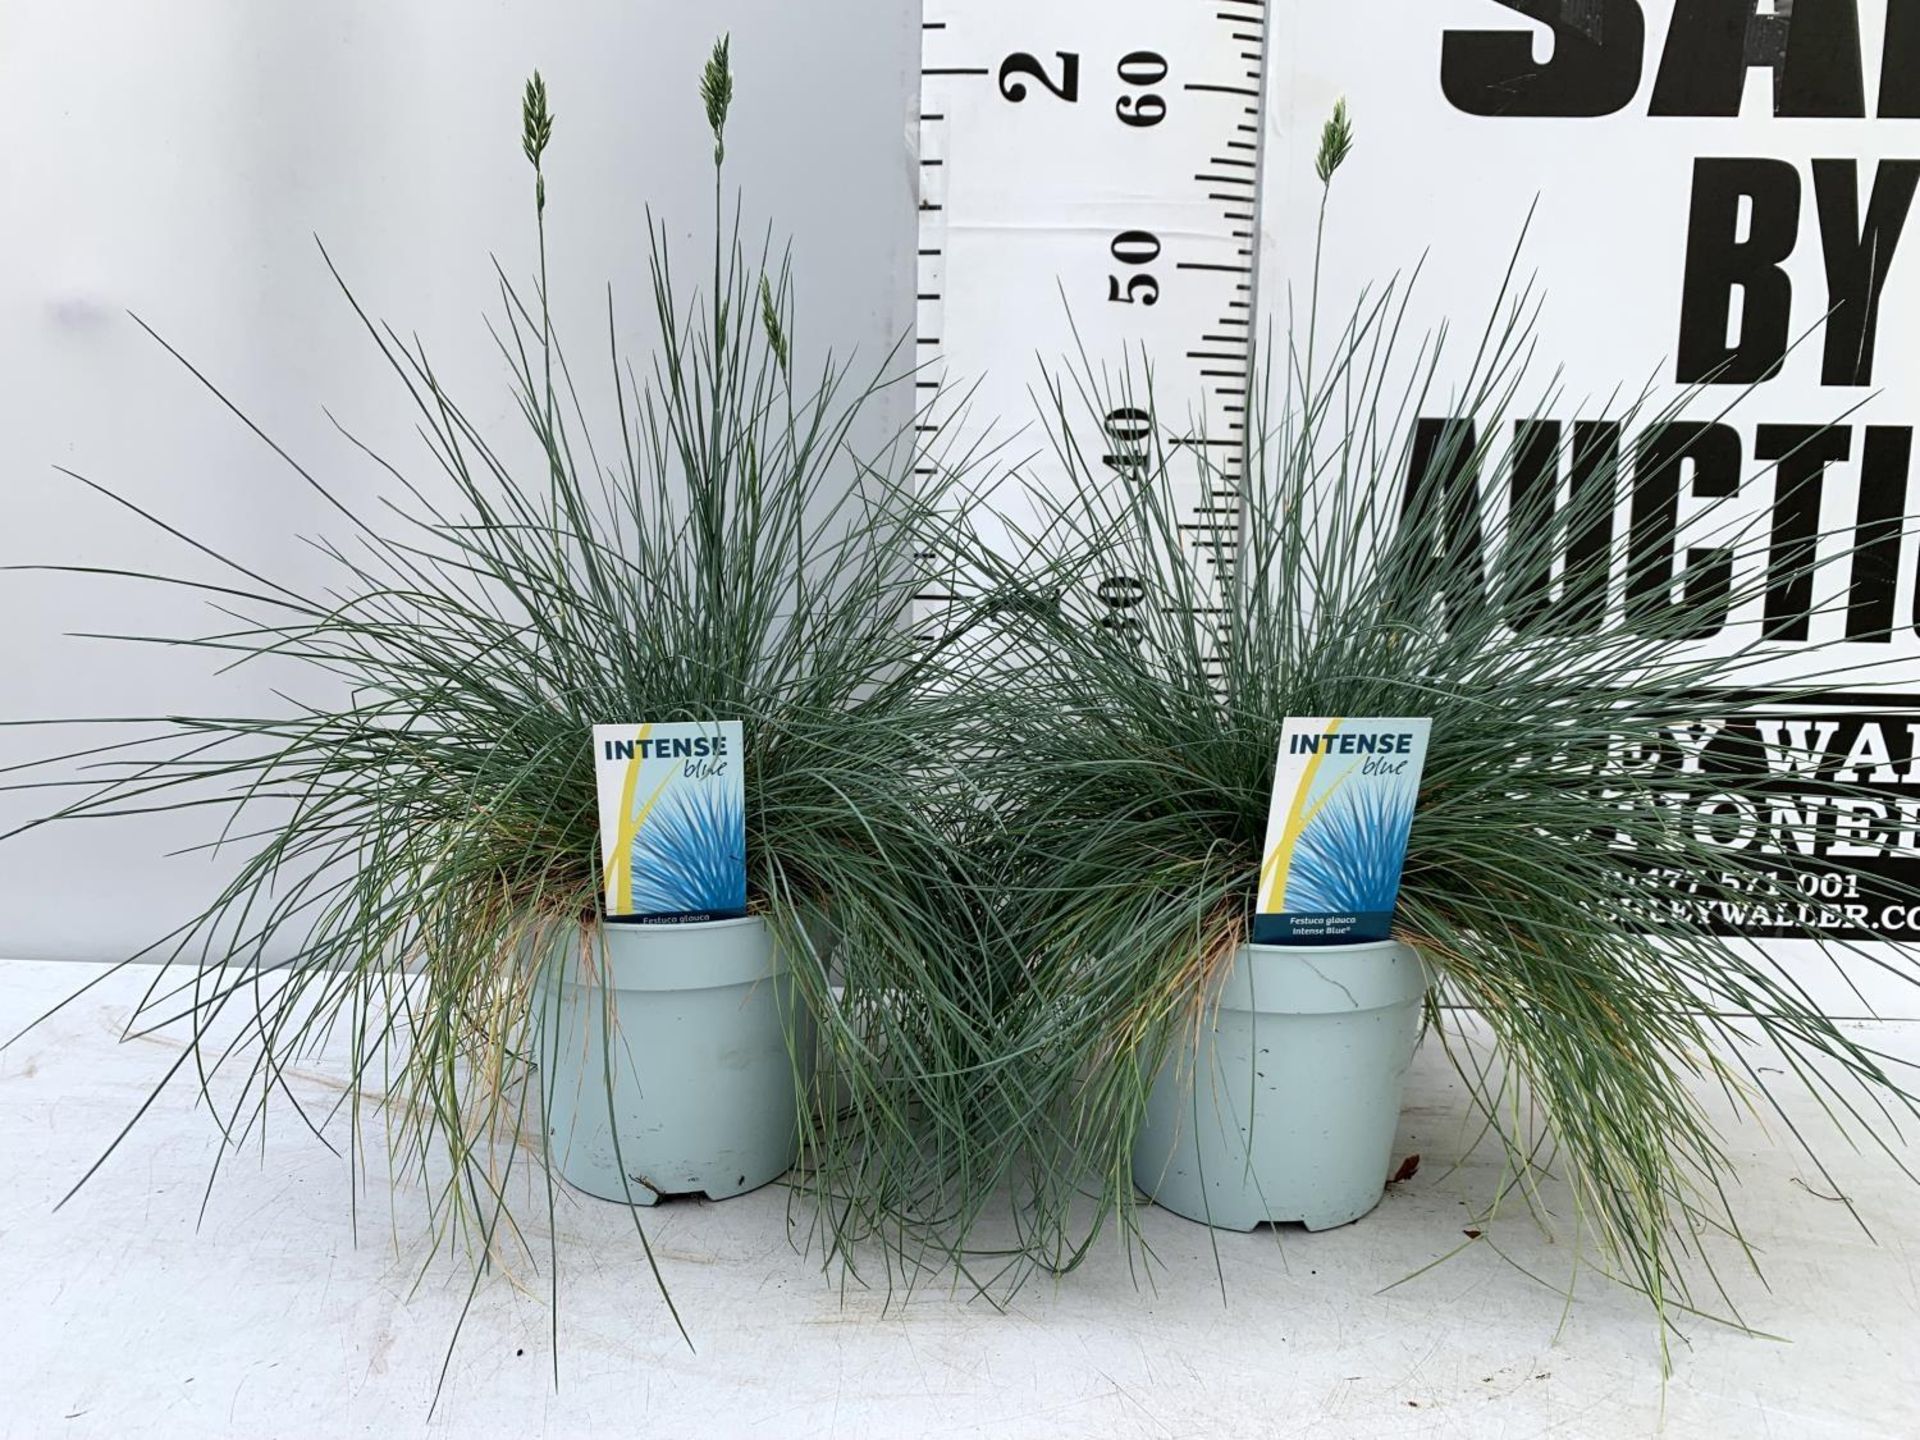 TWO FESTUCA GLAUCA 'INTENSE BLUE' ORNAMENTAL GRASSES IN 2 LTR POTS APPROX 50CM IN HEIGHT PLUS VAT TO - Image 2 of 8